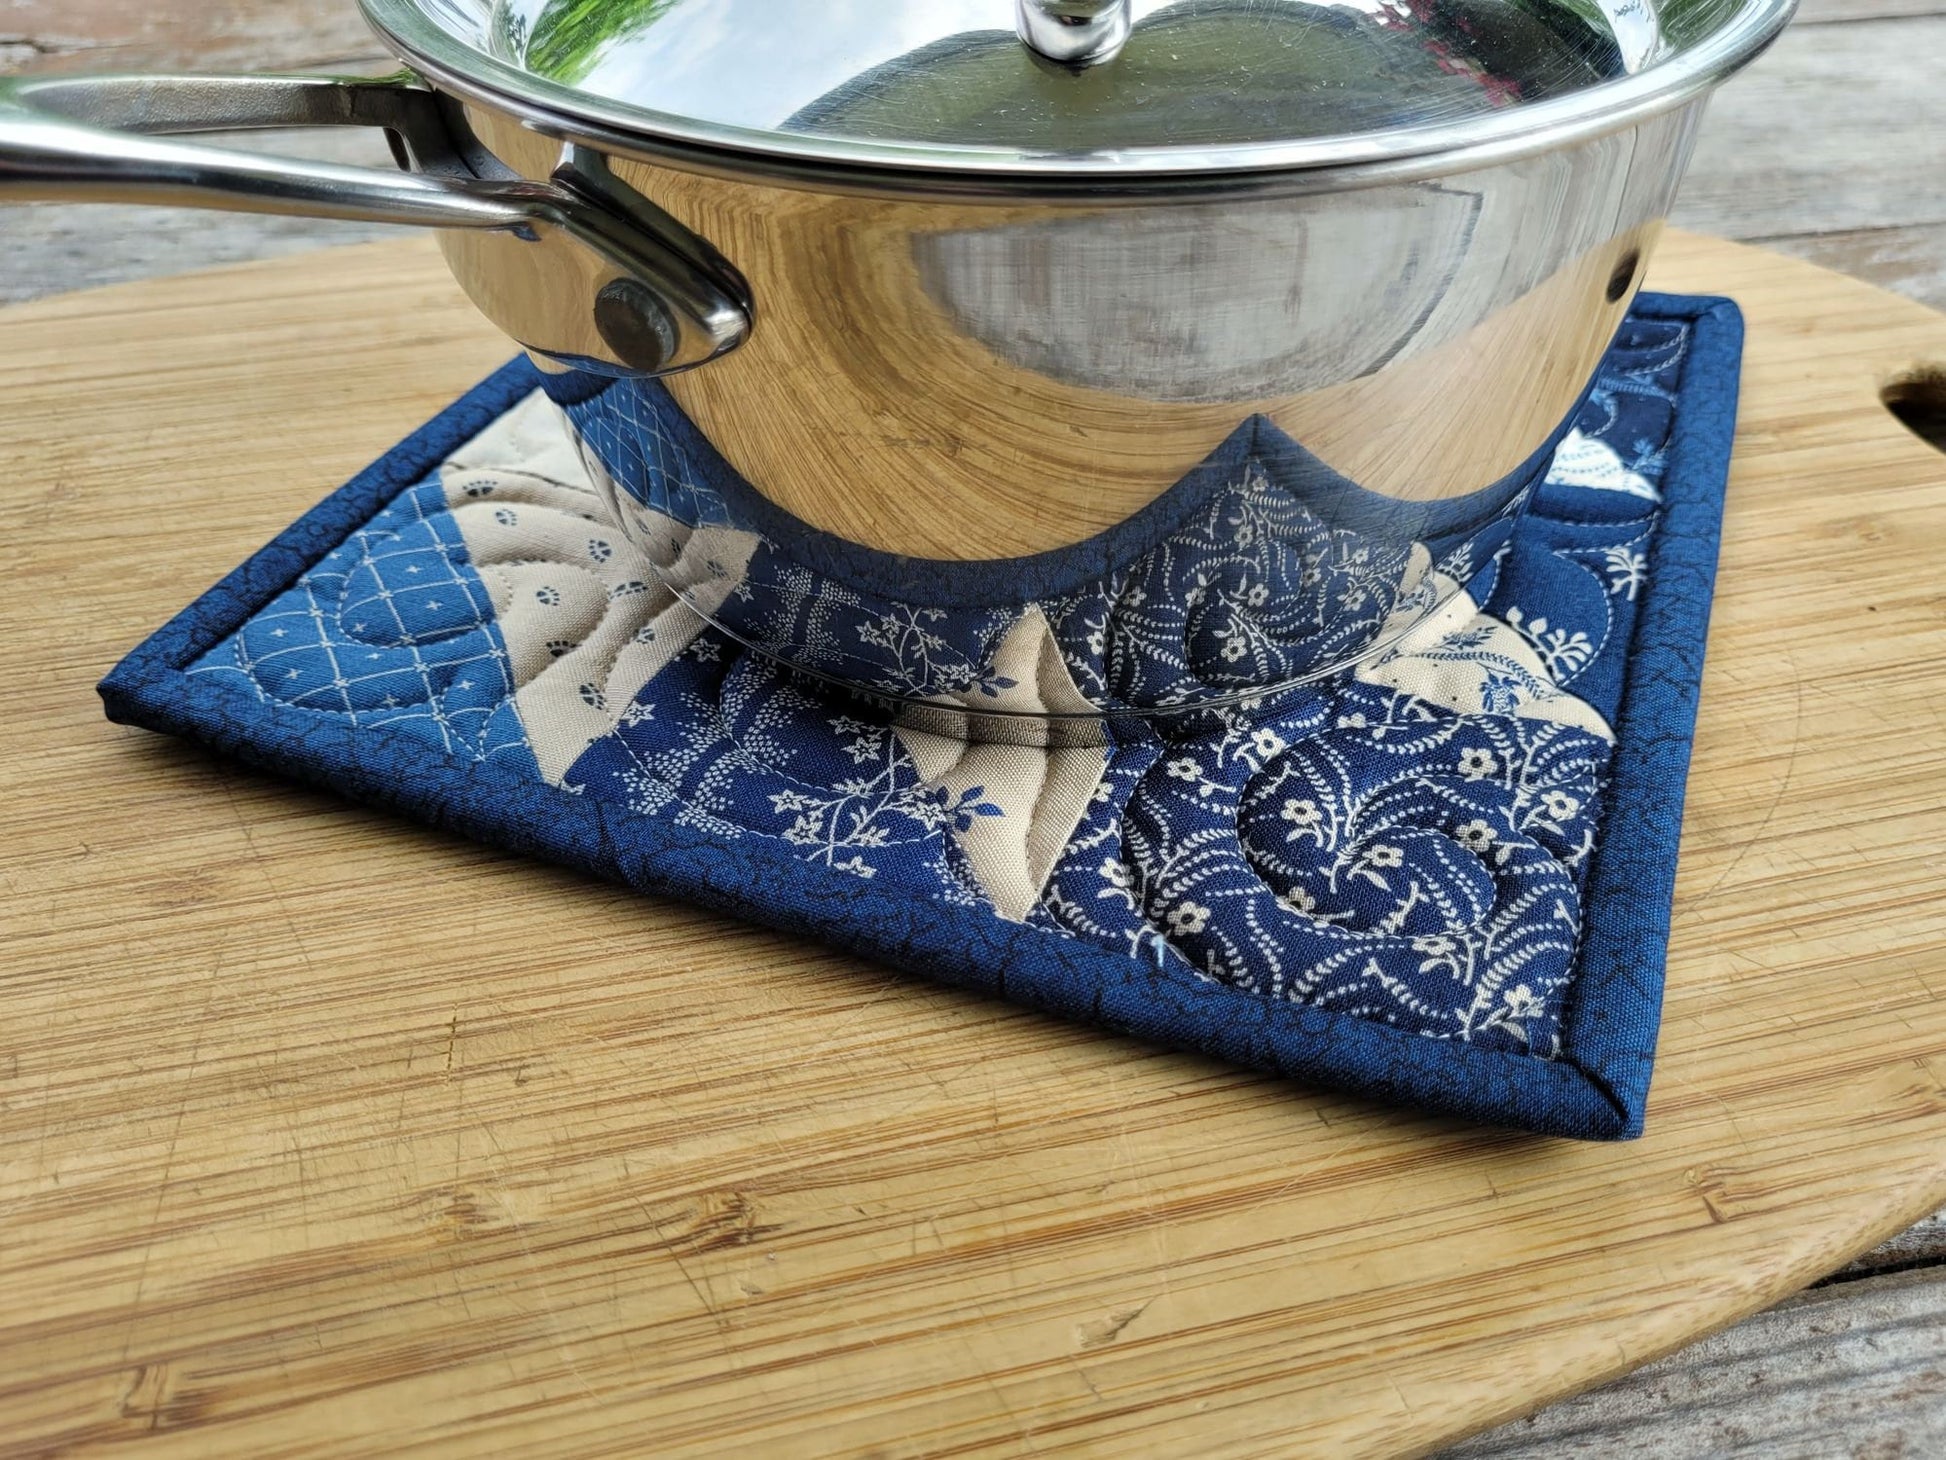 quilted hot mat shown under a small size saucepan